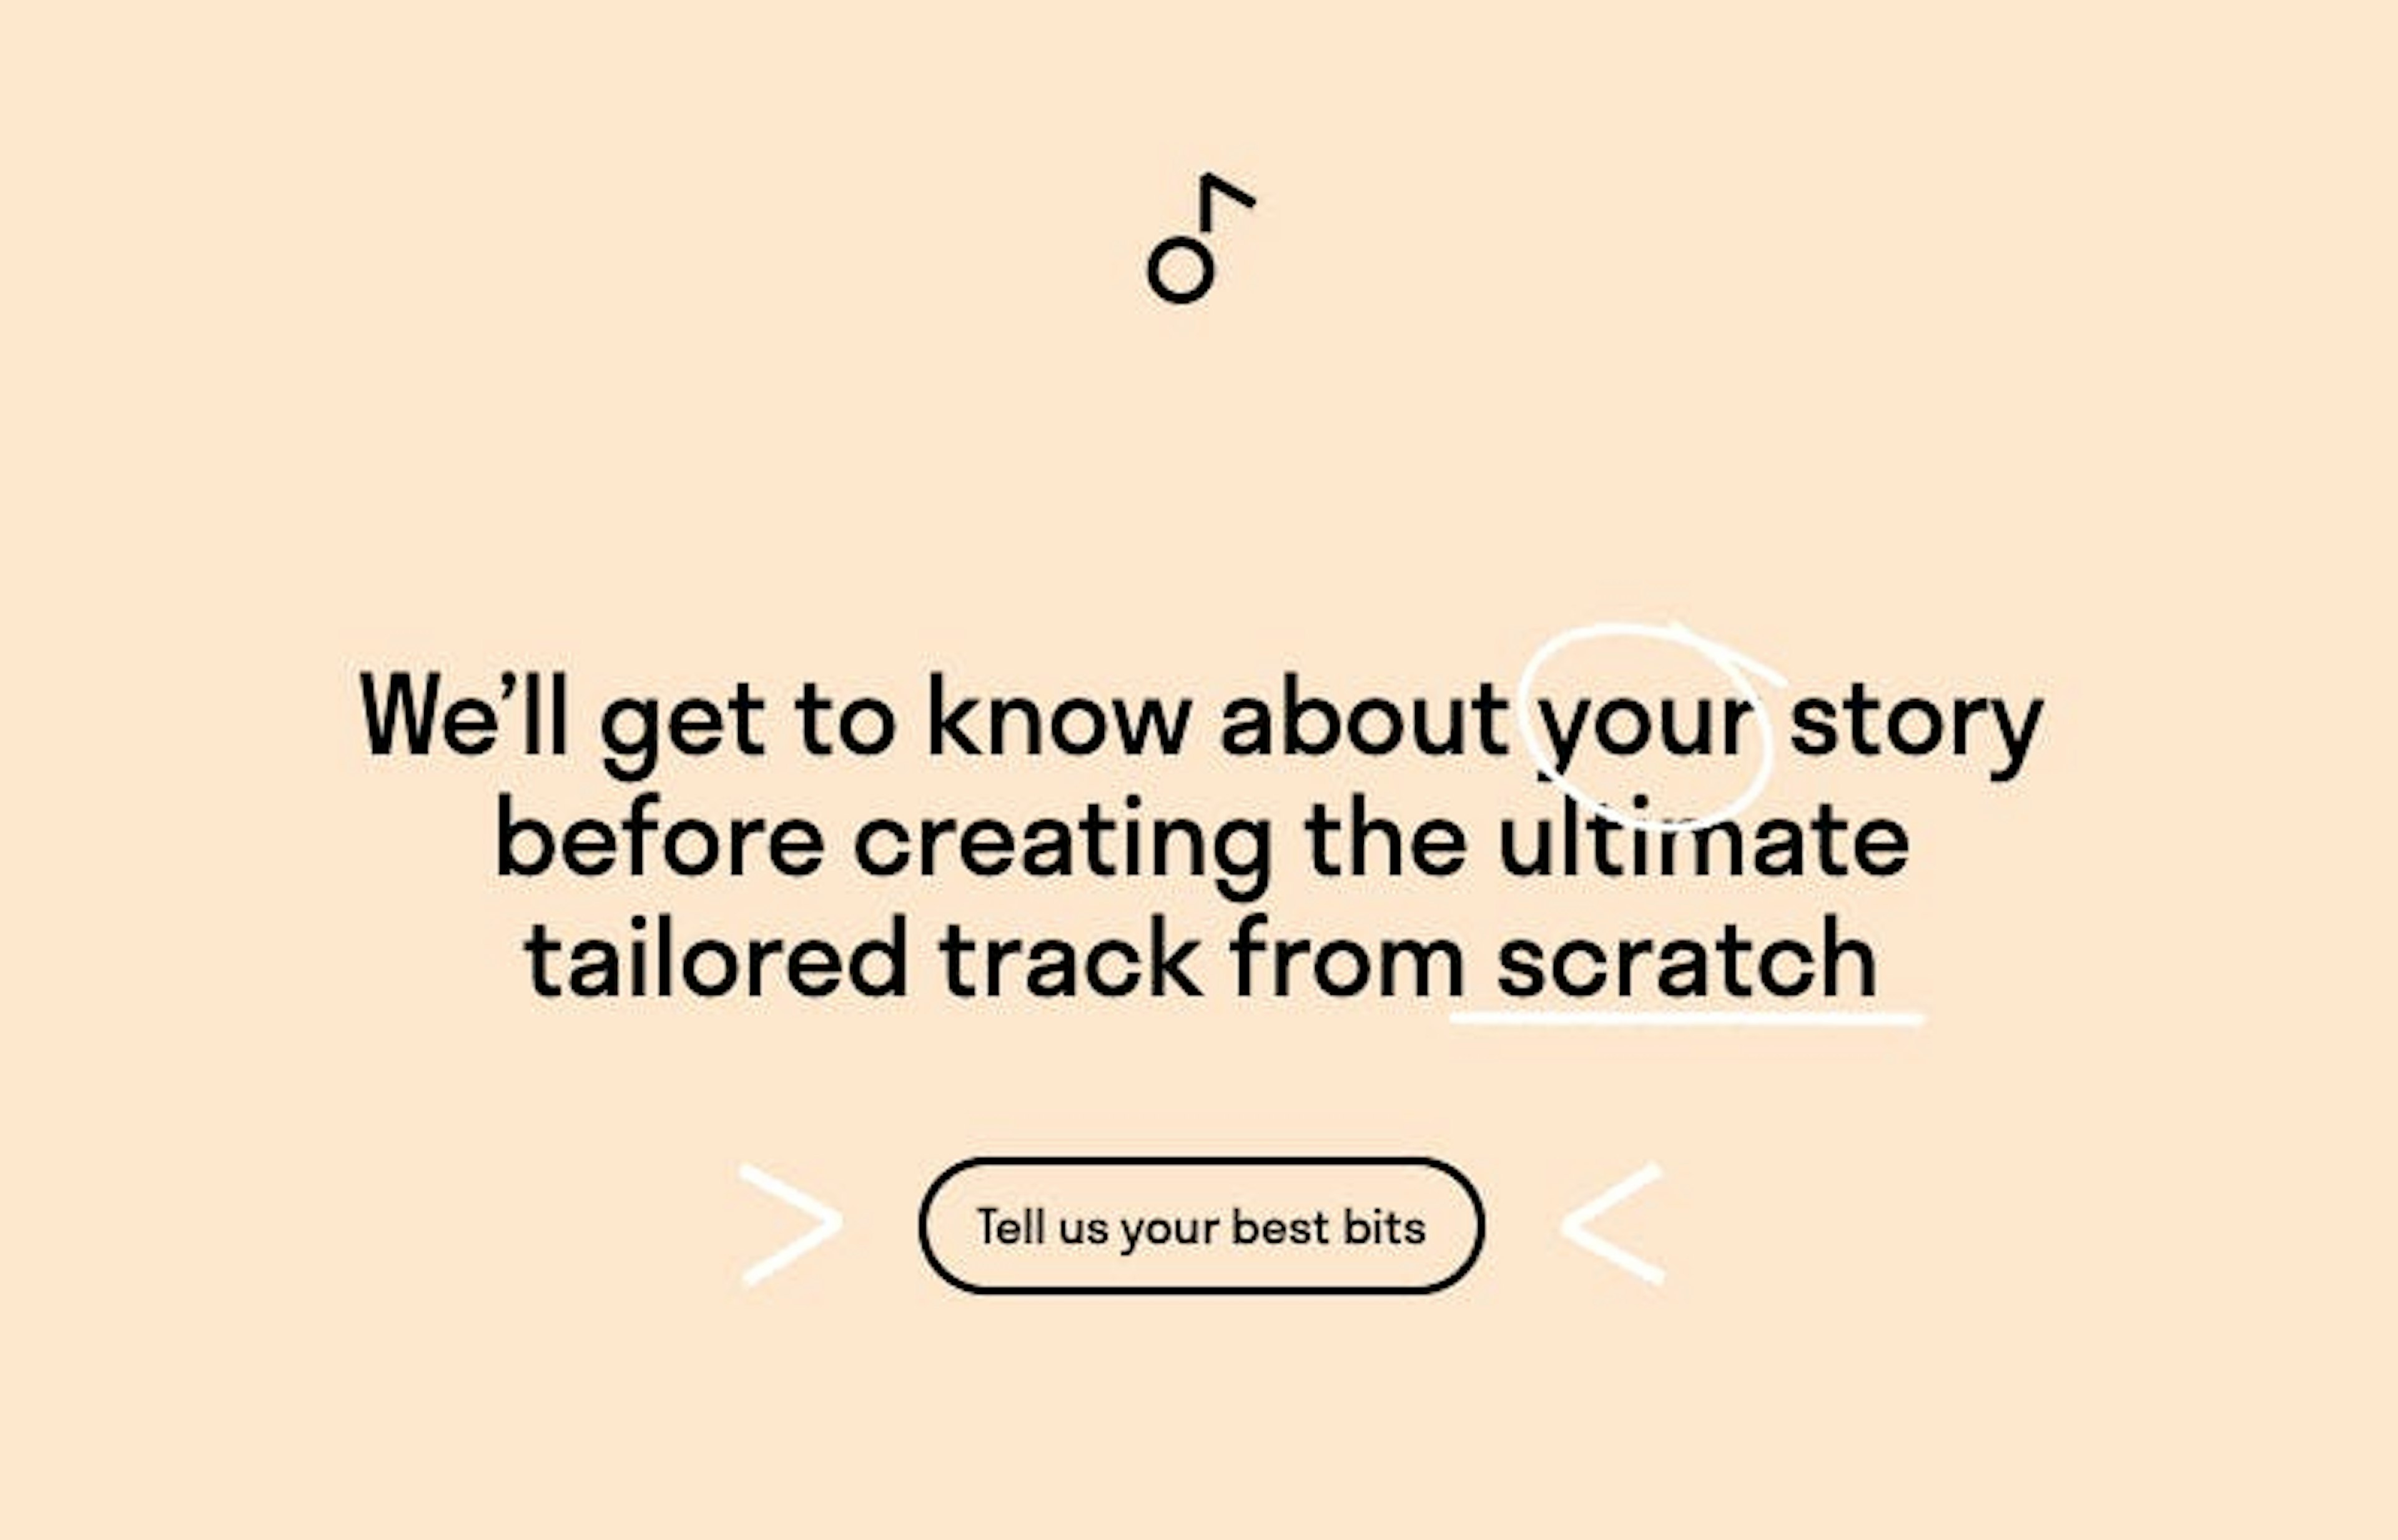 "We’ll get to know about your story before creating the ultimate tailored track from scratch"